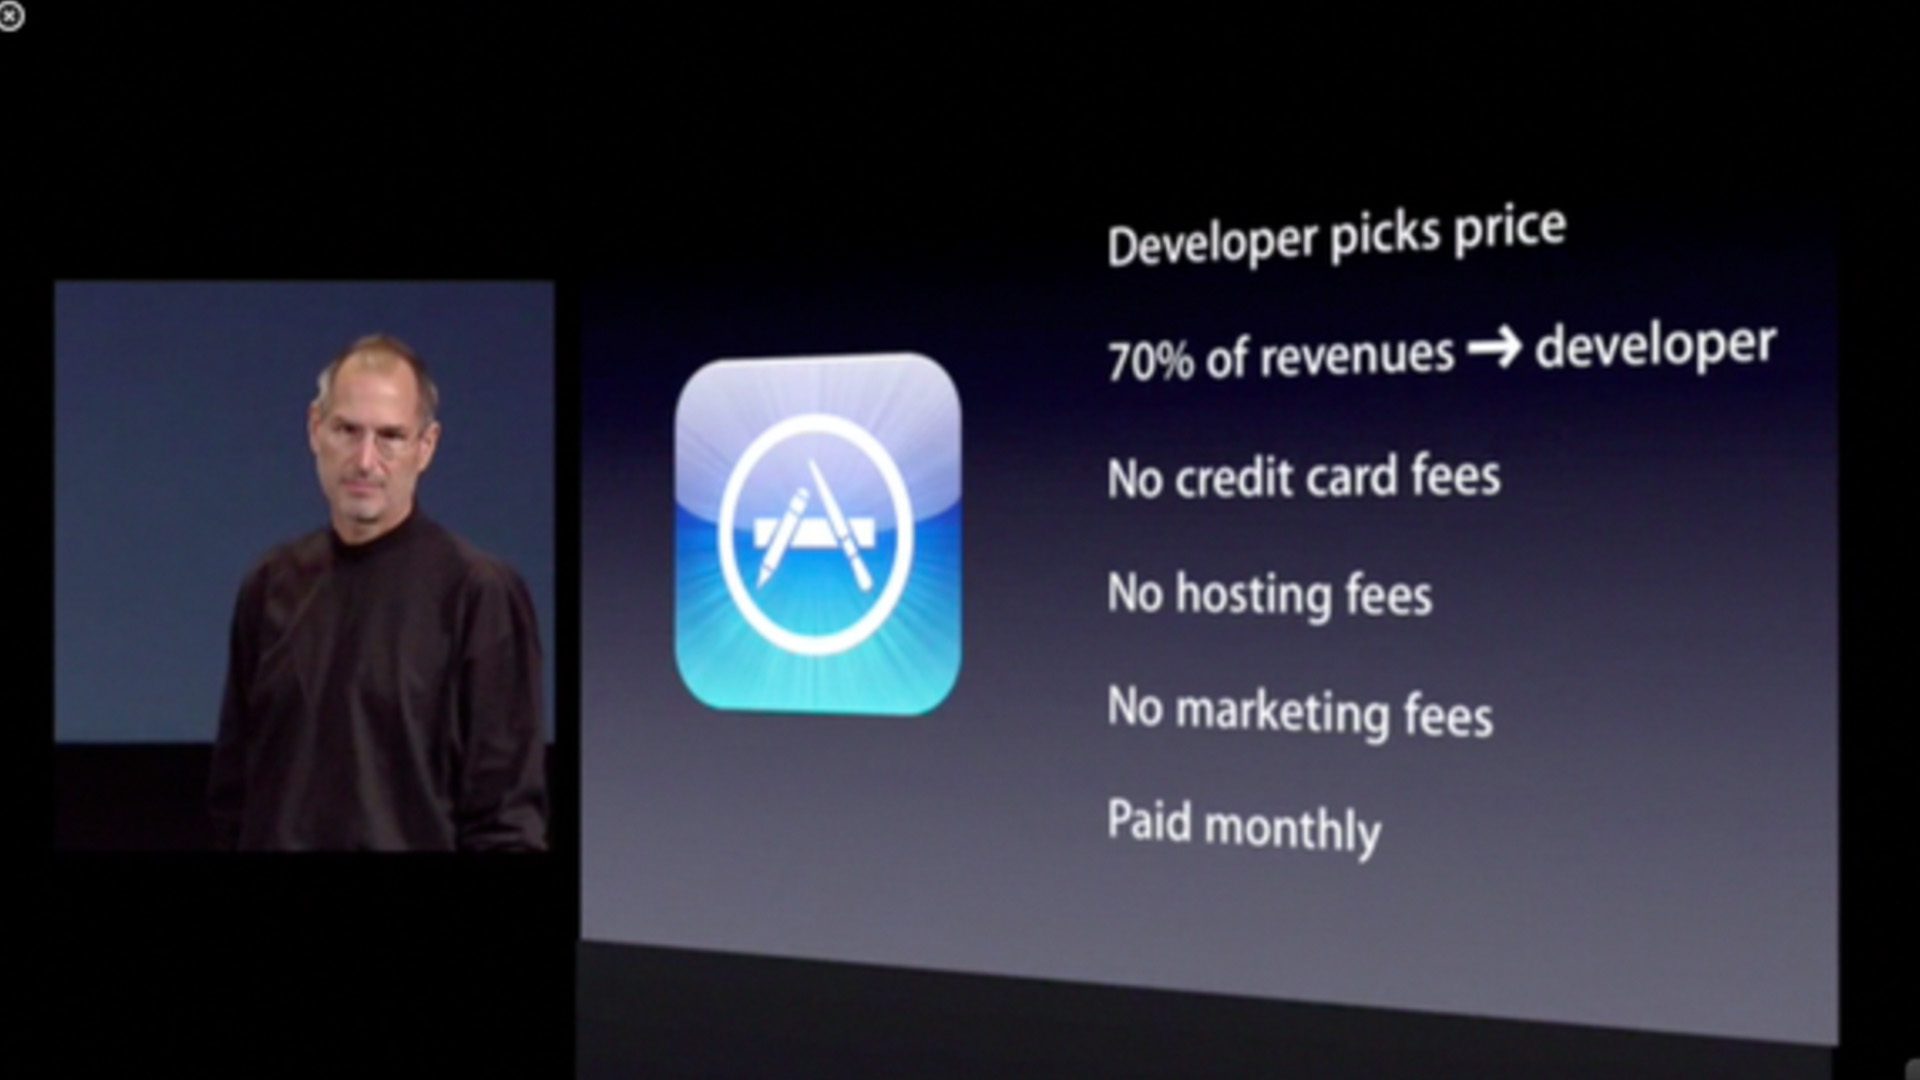 evolution of apps, steve jobs introducing the apple app store